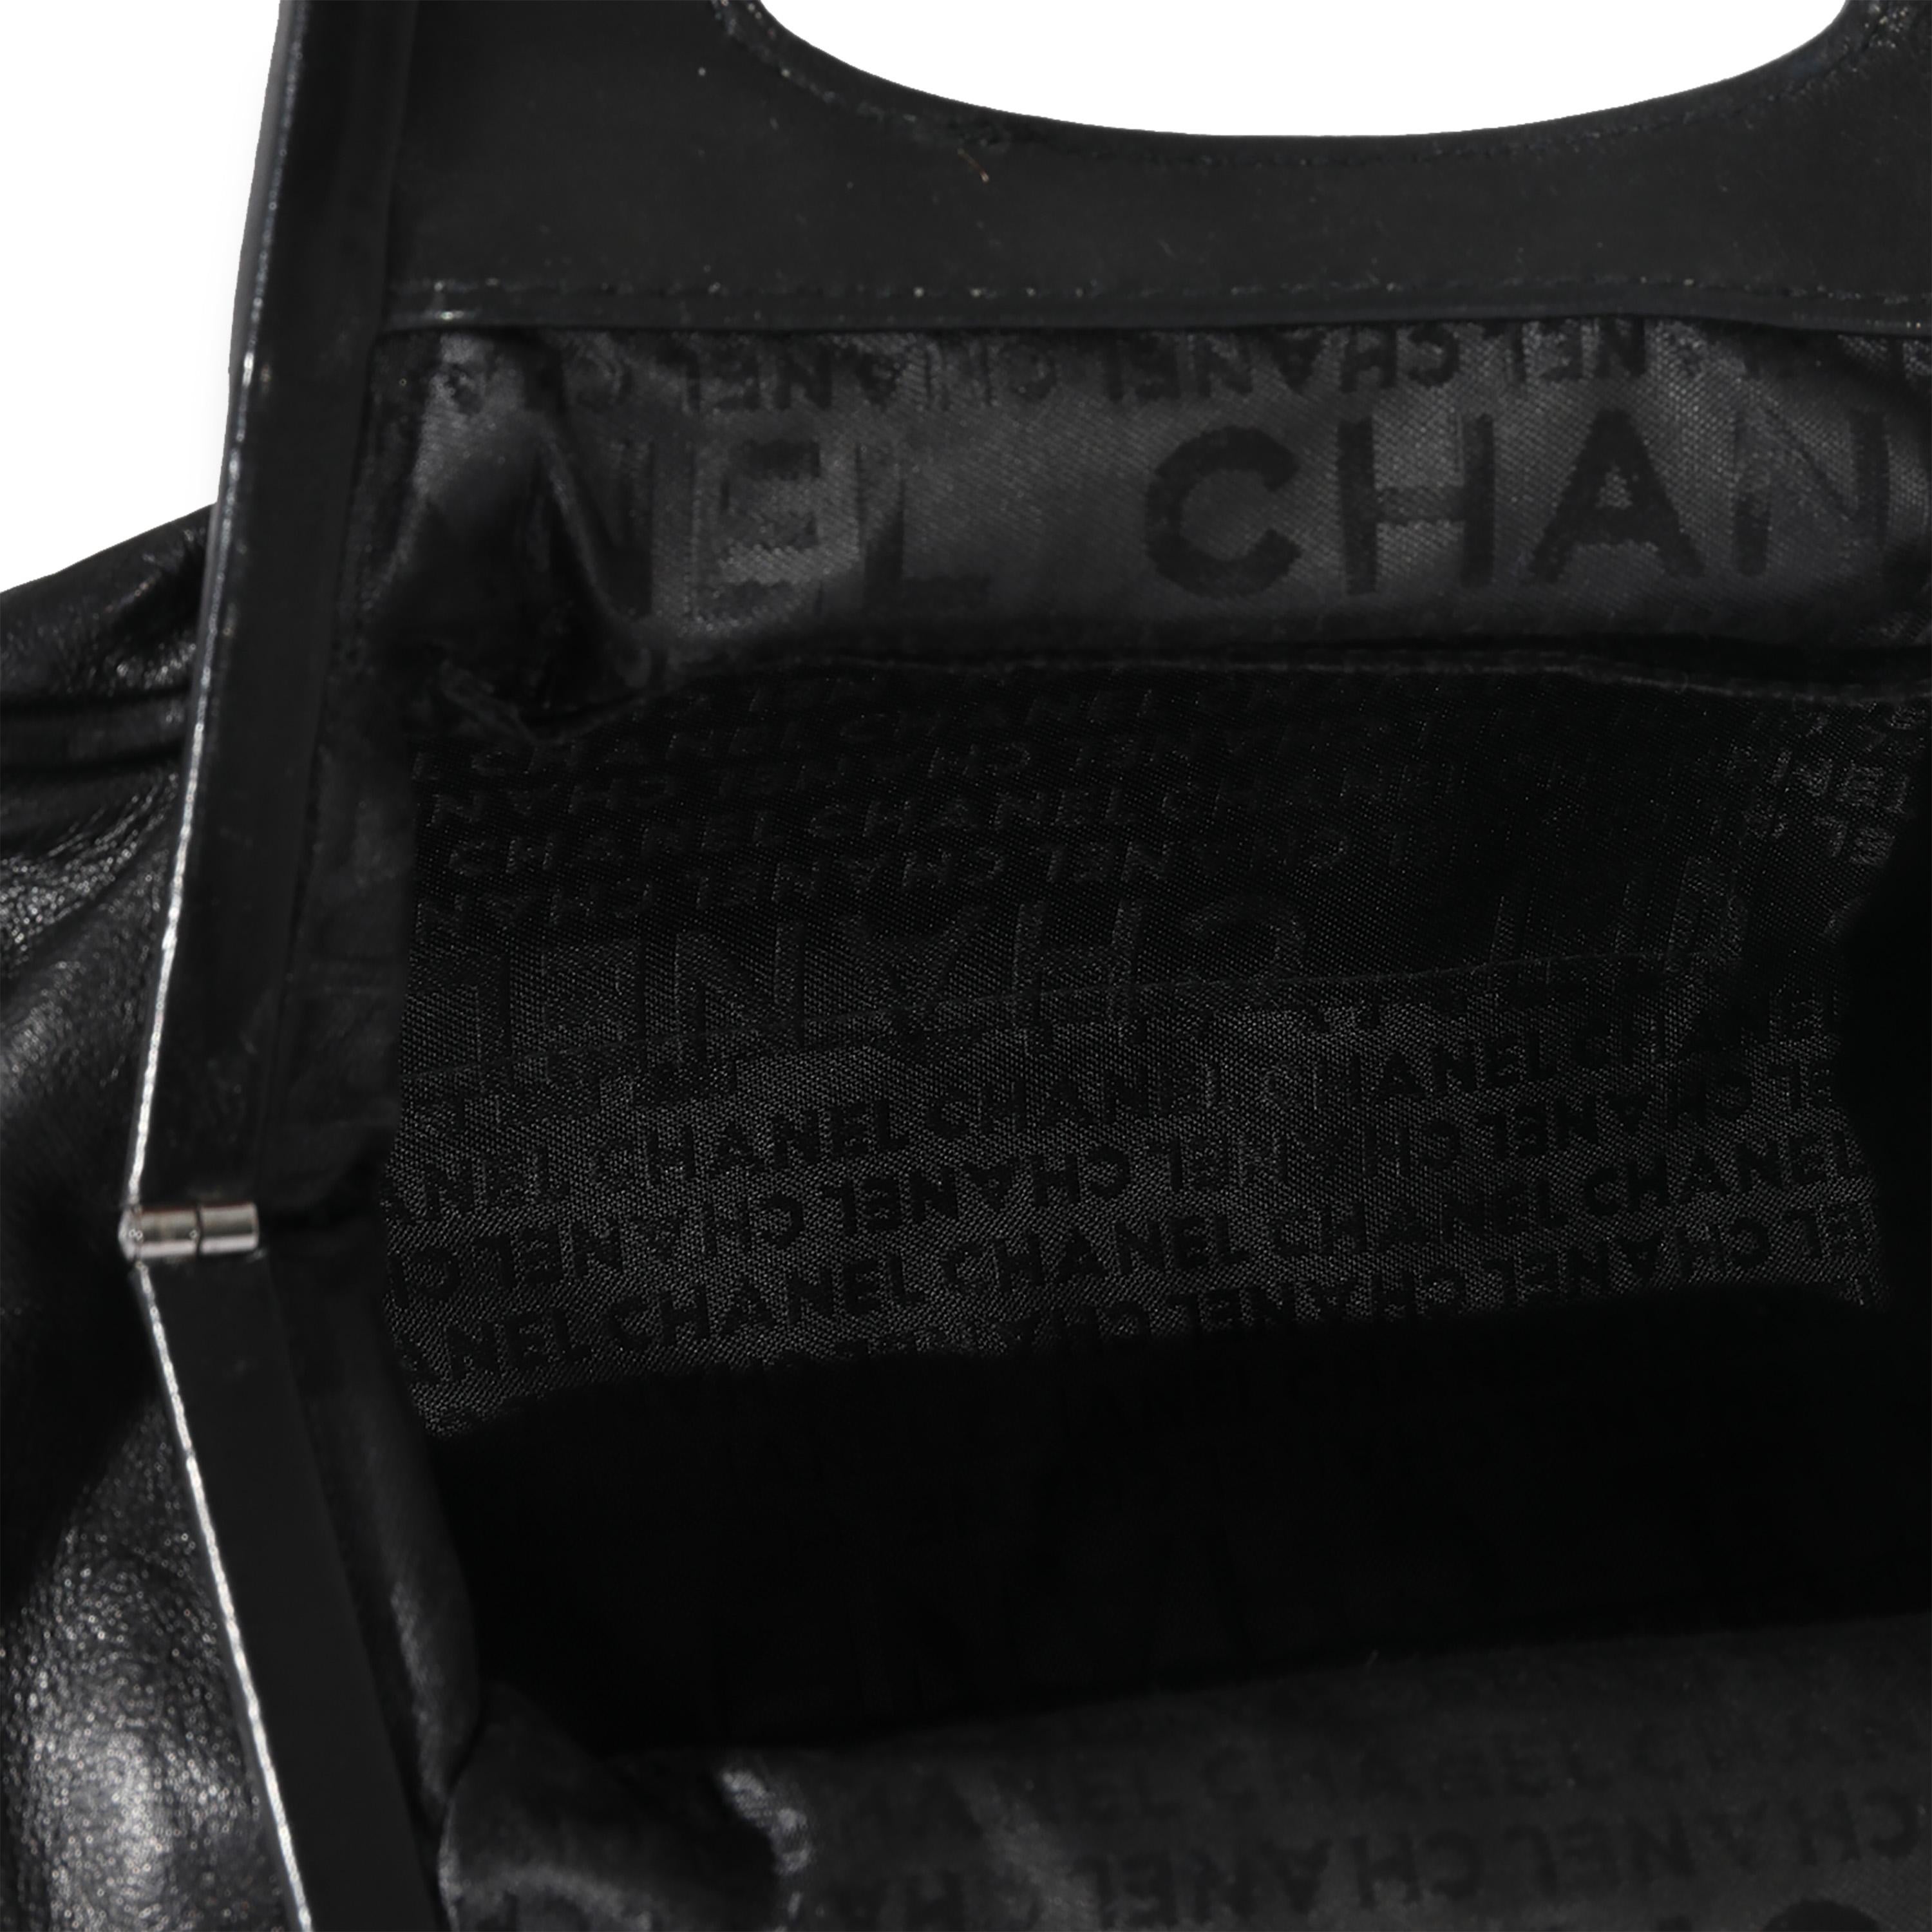 Listing Title: Chanel Black Leather CC Chain Link Clutch
SKU: 125072
Condition: Pre-owned 
Handbag Condition: Good
Condition Comments: Good Condition. Scuffing throughout exterior leather. Scratching to hardware. Scuffing to interior leather.
Brand: